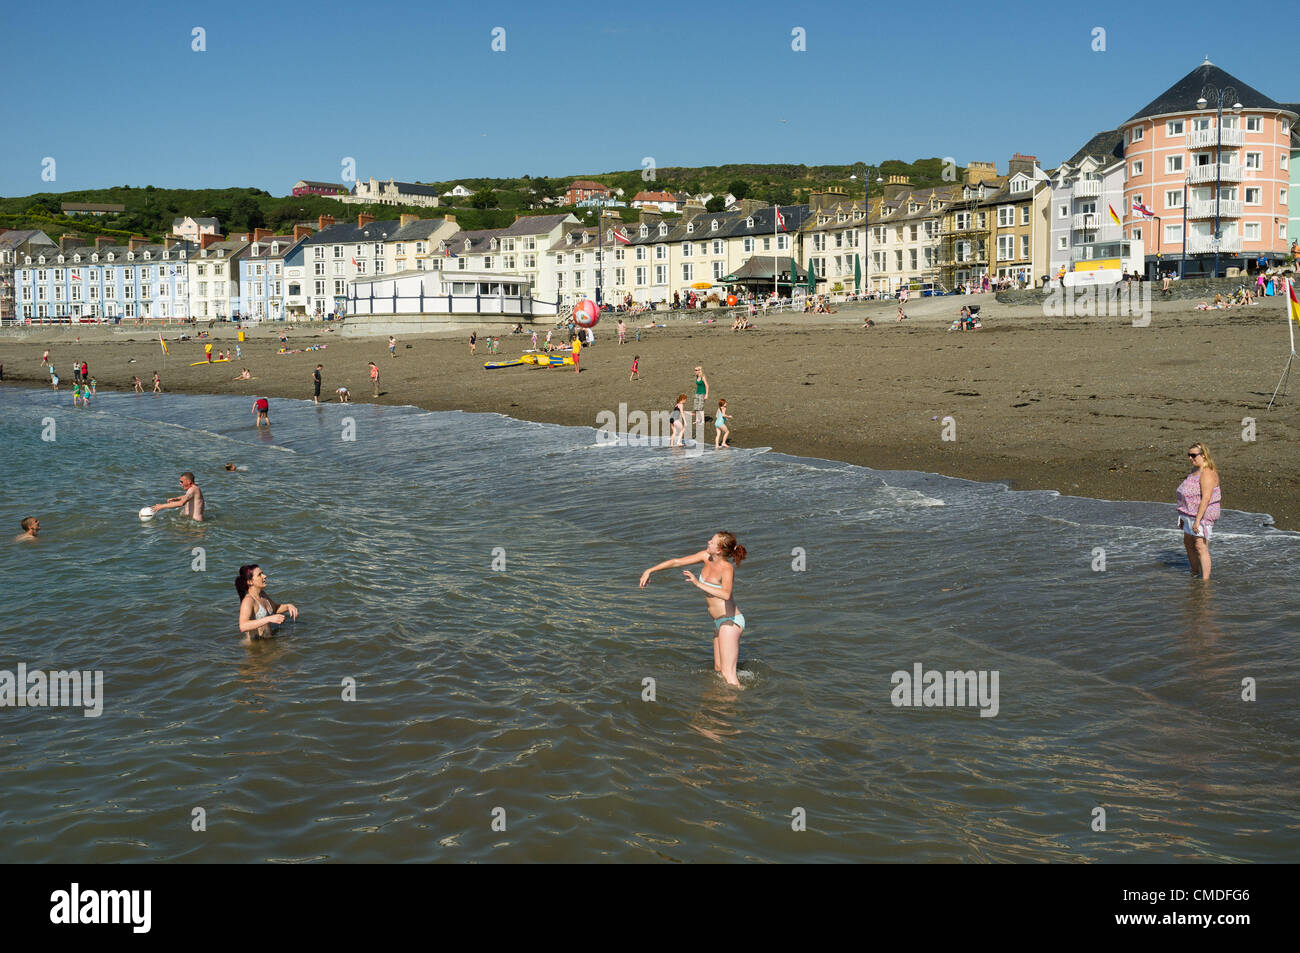 Tuesday 24 July 2012. Aberystwyth, Wales, UK. The warm weather continues across the UK with temperatures into the high 20s (celsius). People enjoy the sunshine on the beach and in the sea in this Welsh coastal resort. Stock Photo